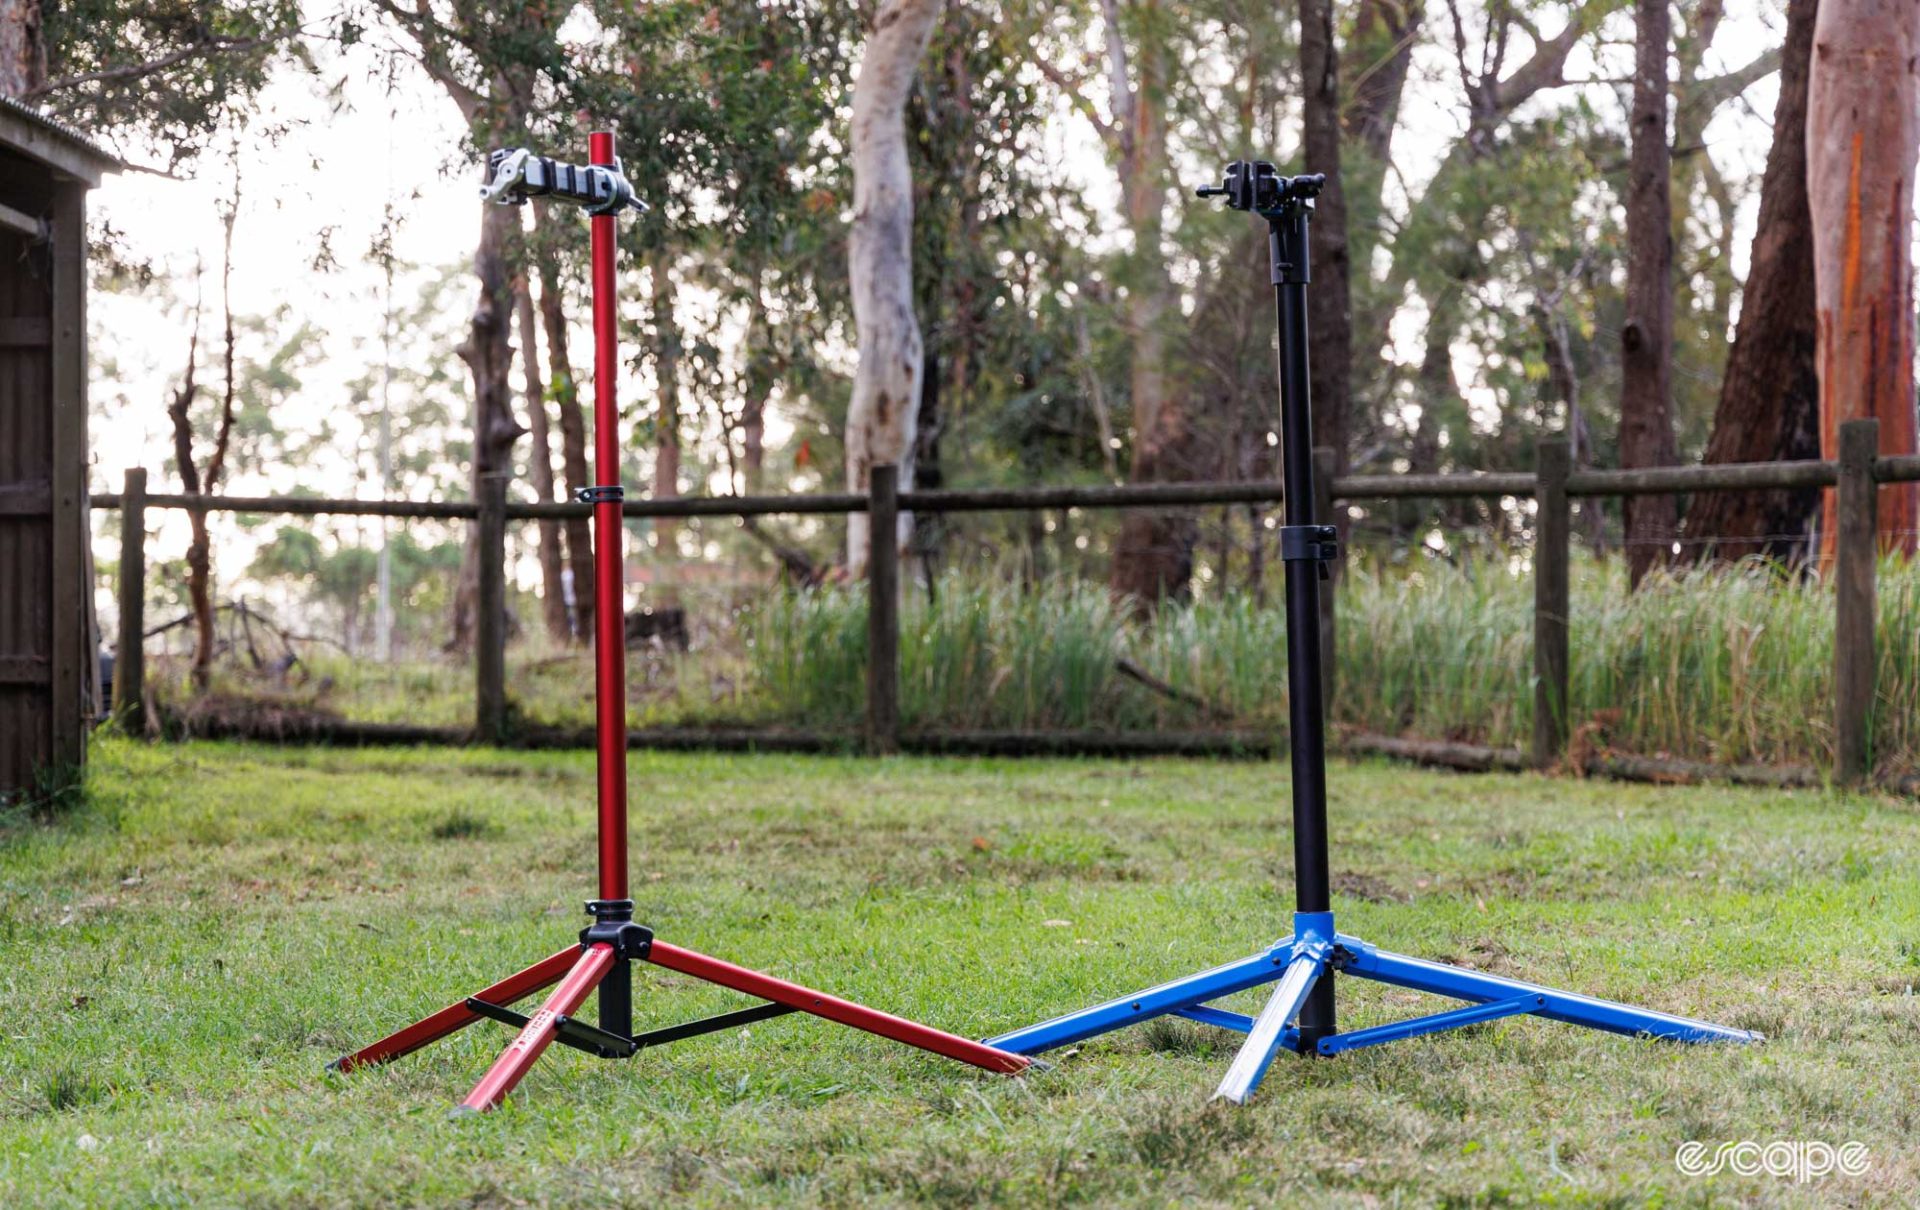 Feedback Sports Pro Mechanic and Park Tool PRS-26 repair stands unfolded and on a grass. field